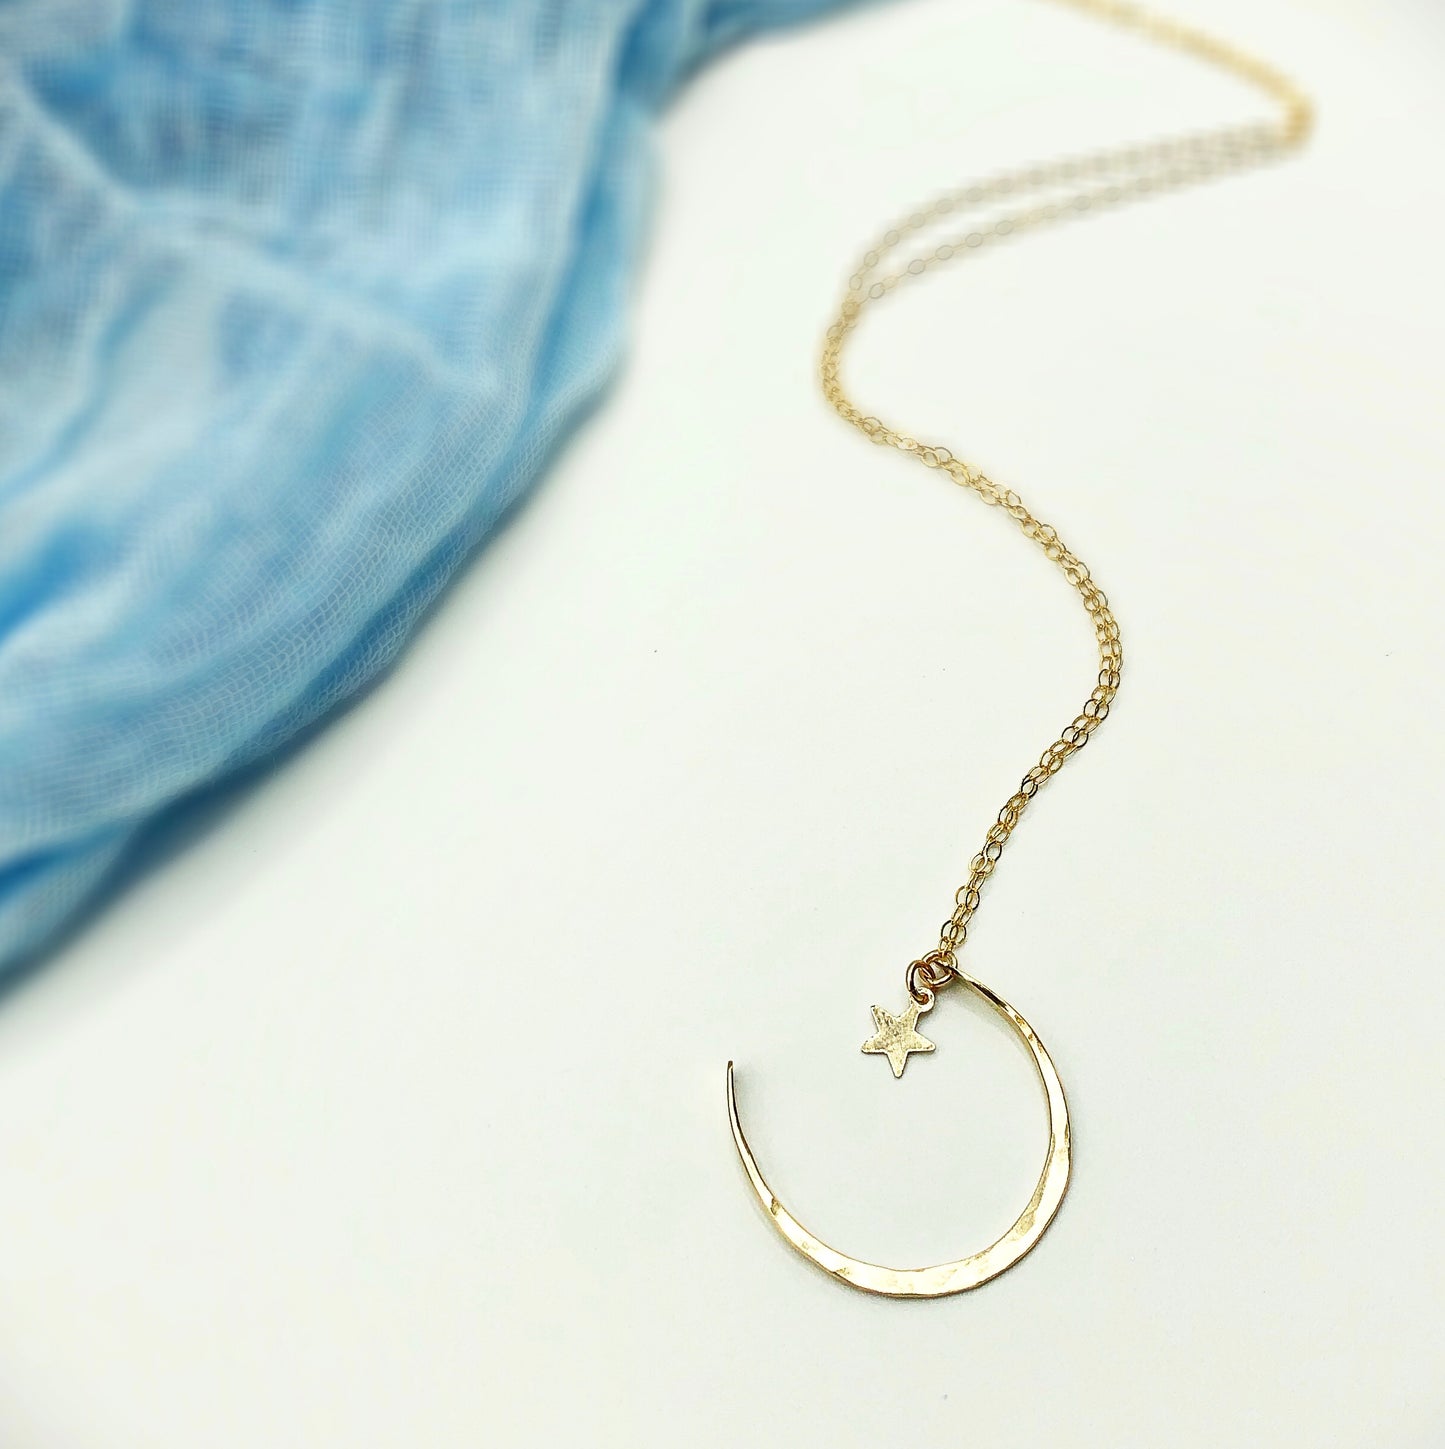 Crescent Moon and Star Necklace - Blue Sky Feathers